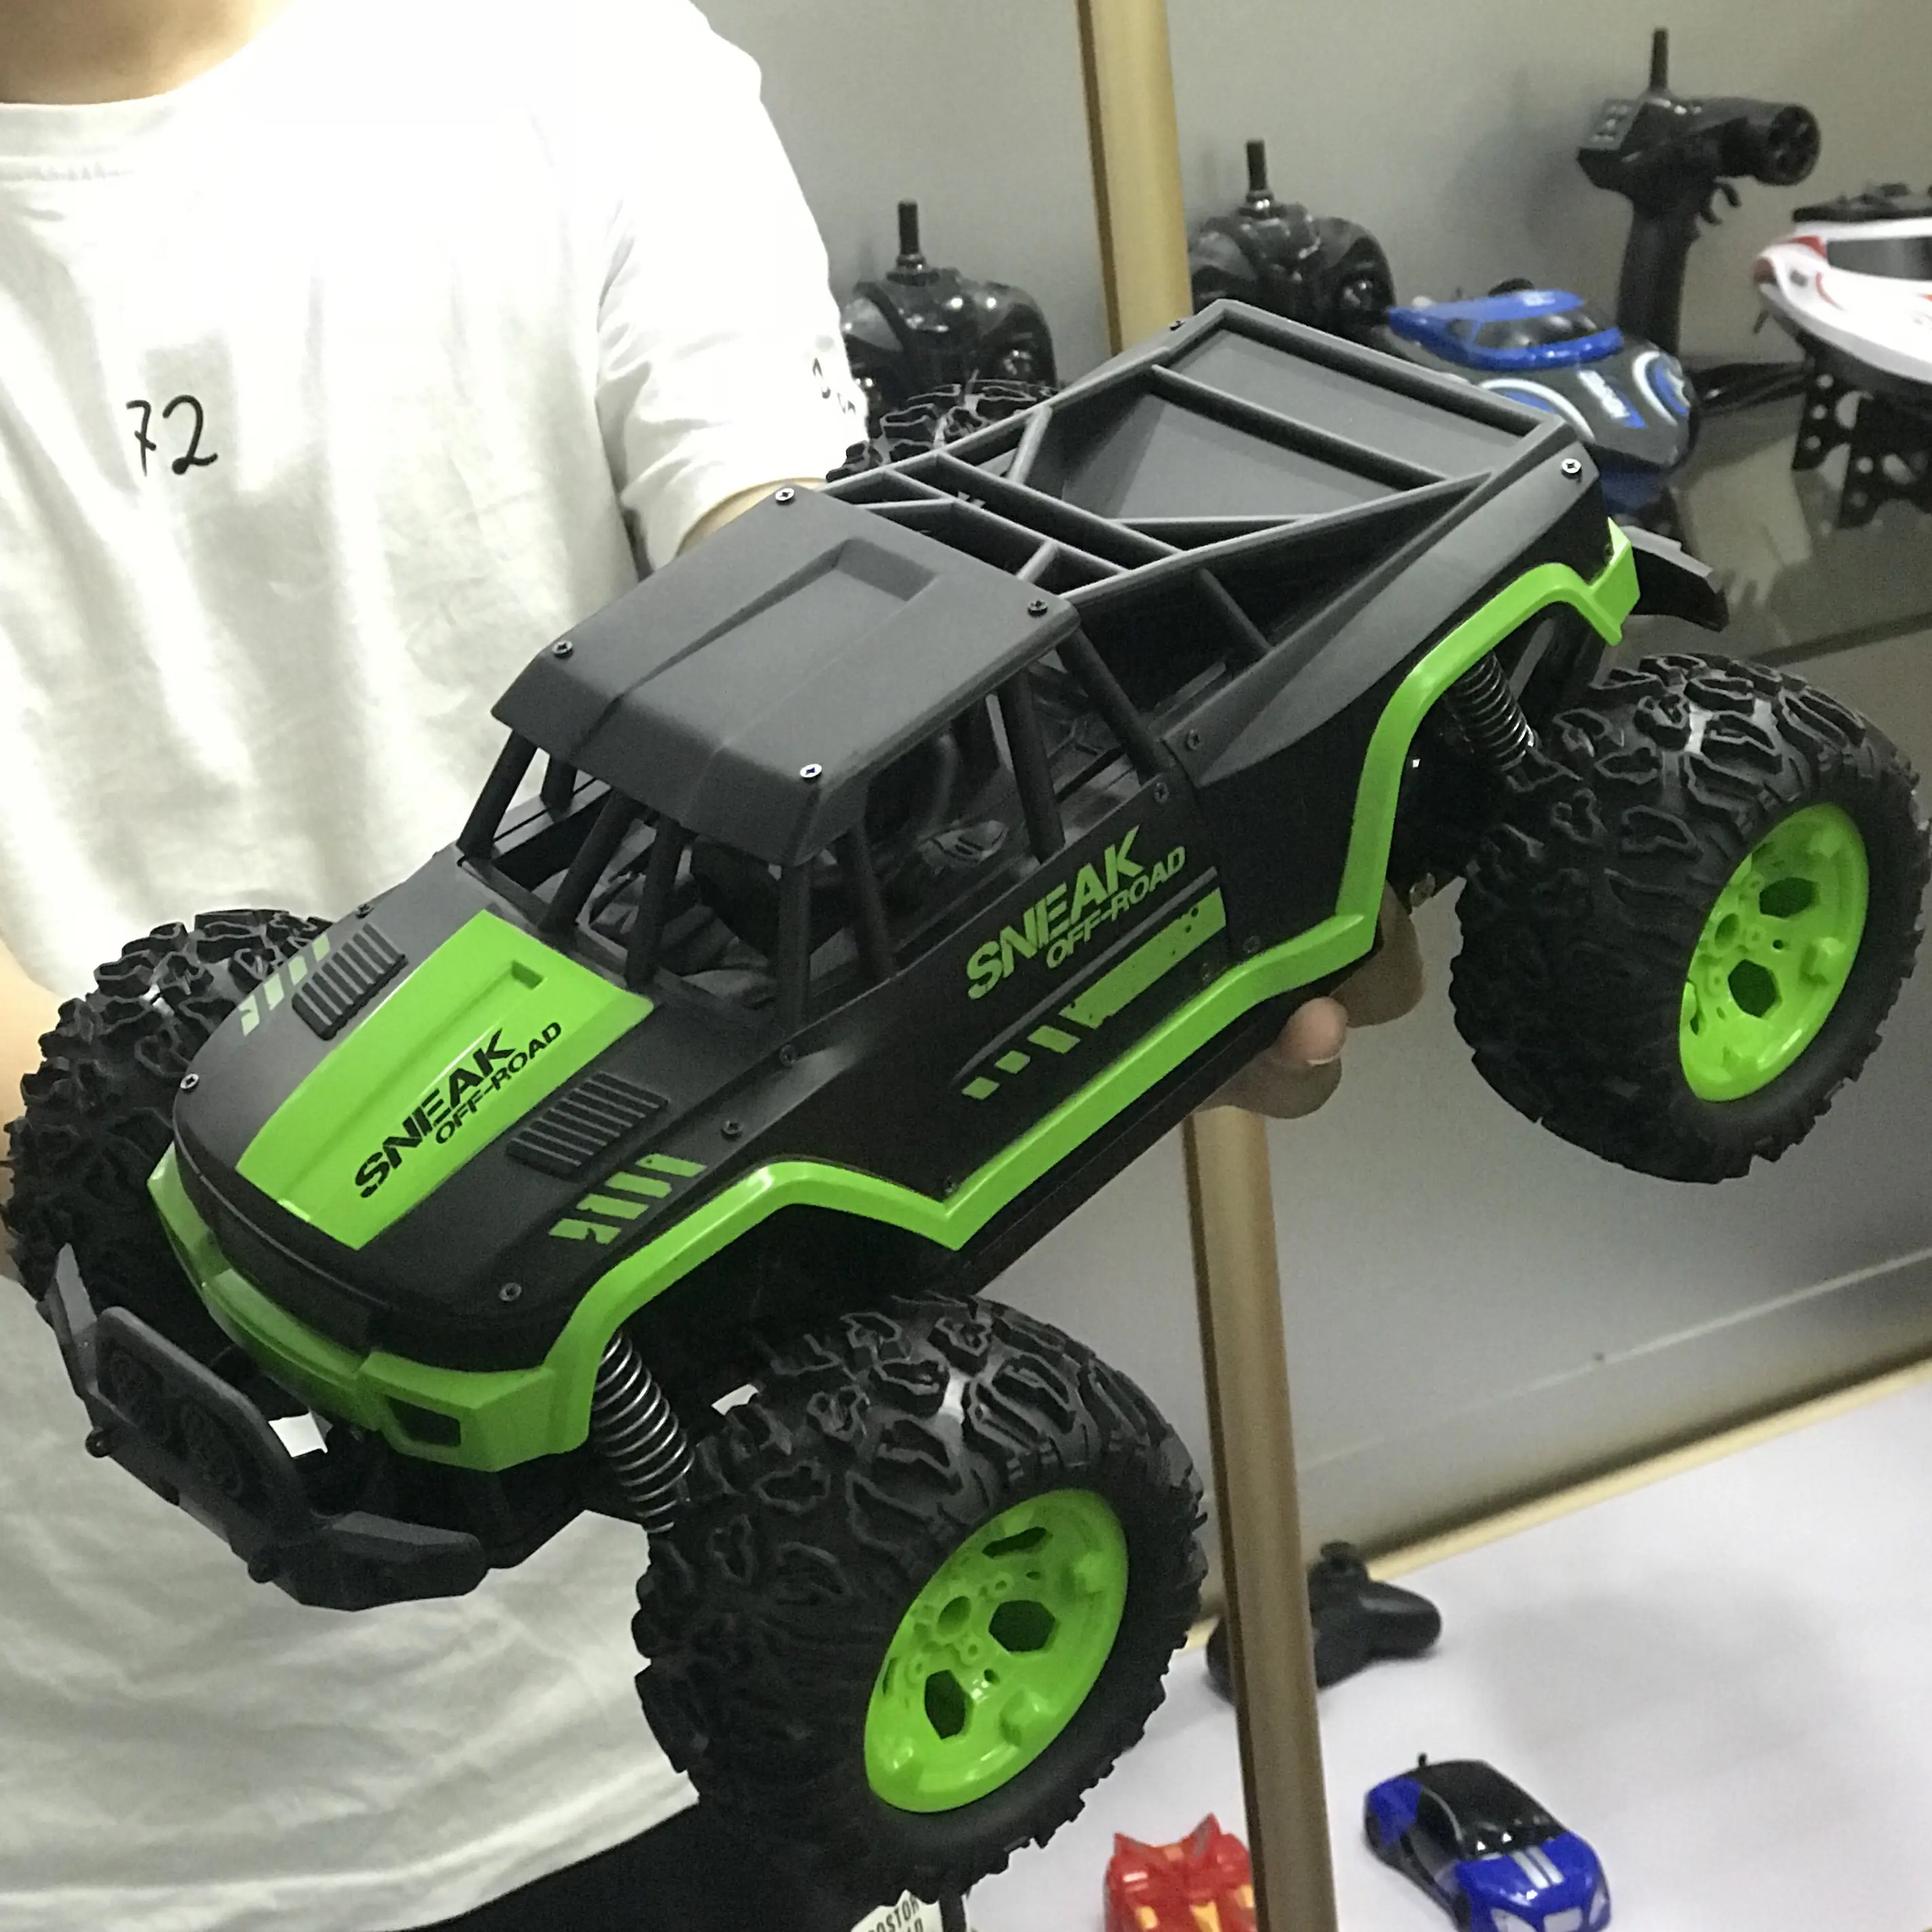 Flytec RTR RC Monster Truck 2.4G 1/12 High Speed Electric Buggy Crawler RC Racing Car 8813